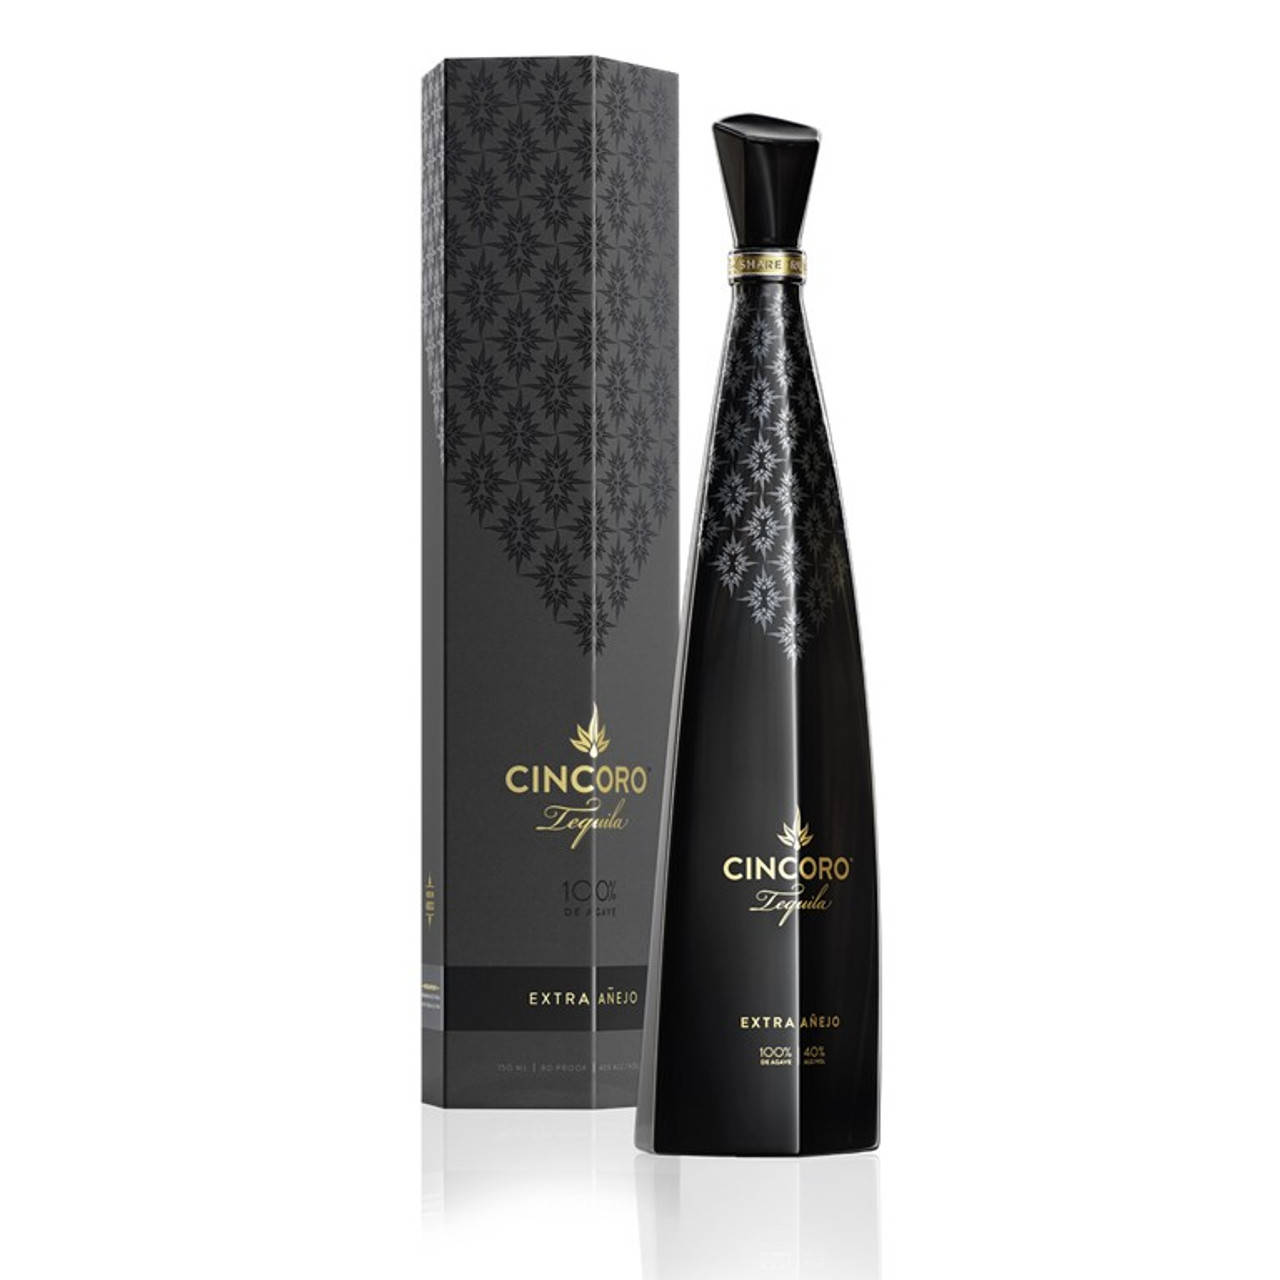 Luxurious Cincoro Tequila Extra Anejo Bottle and Box Wallpaper